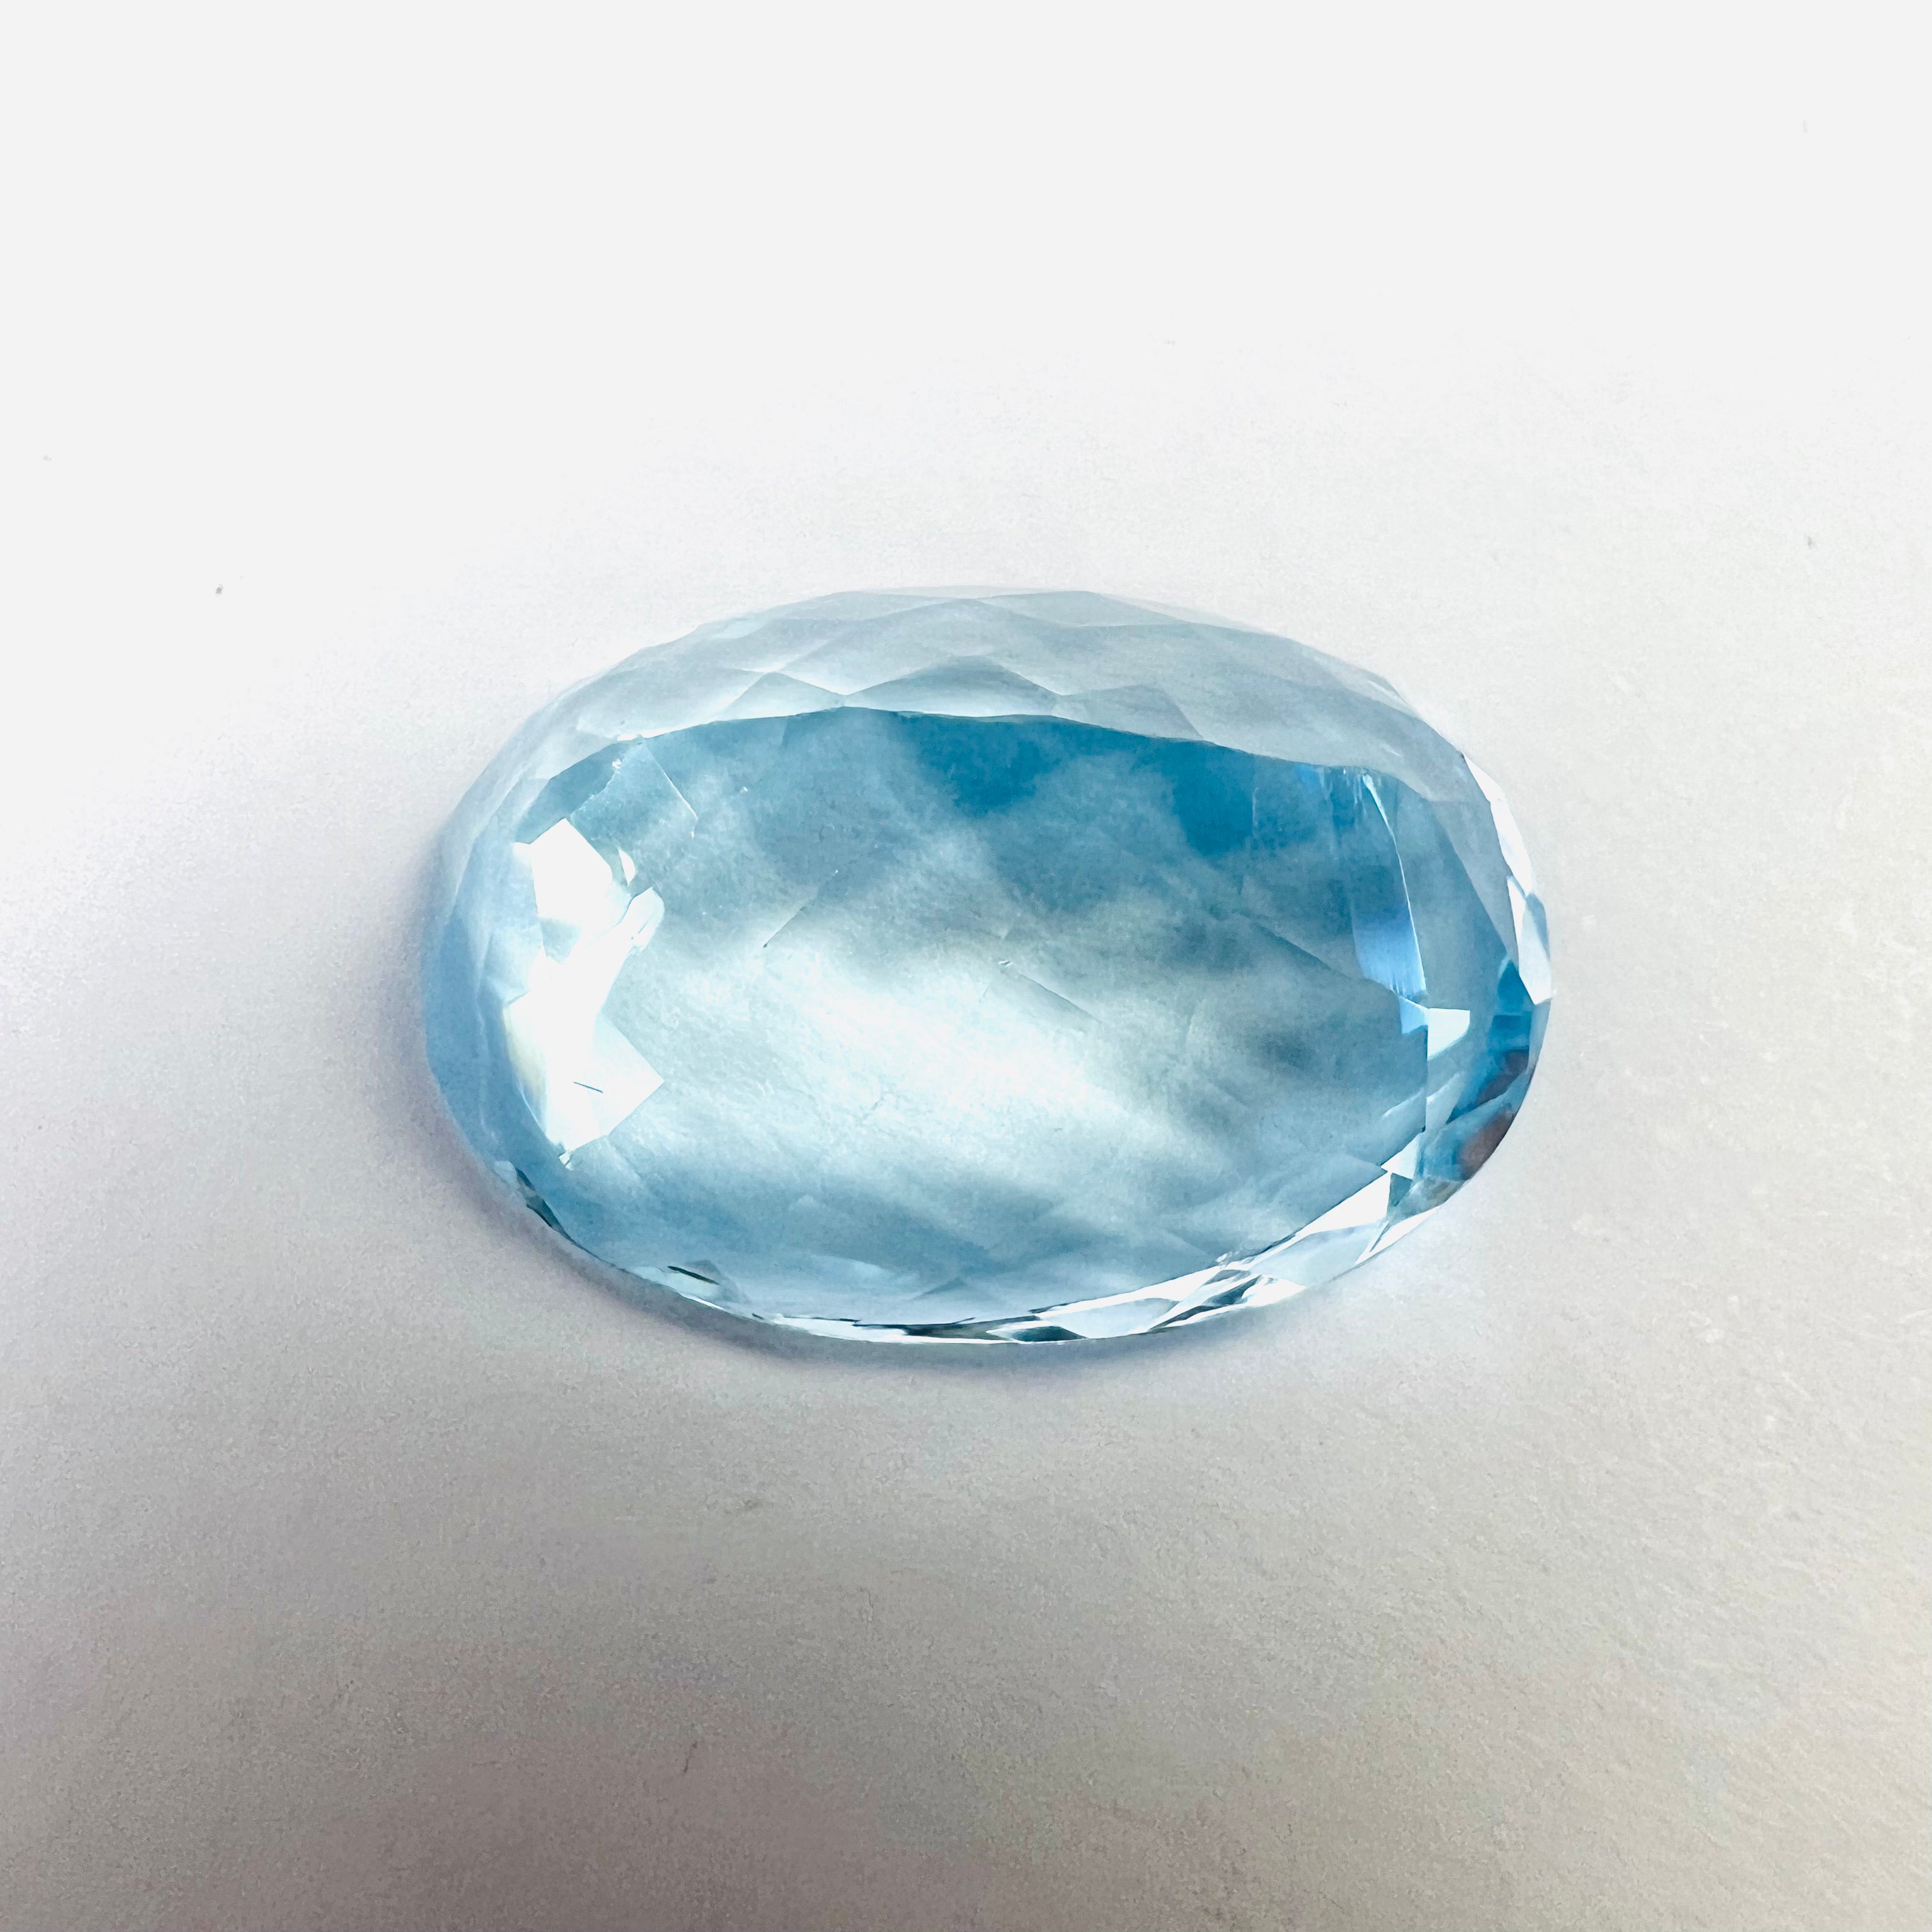 23.43CTW Loose Natural Oval Cut Topaz 21x15x9mm Earth mined Gemstone